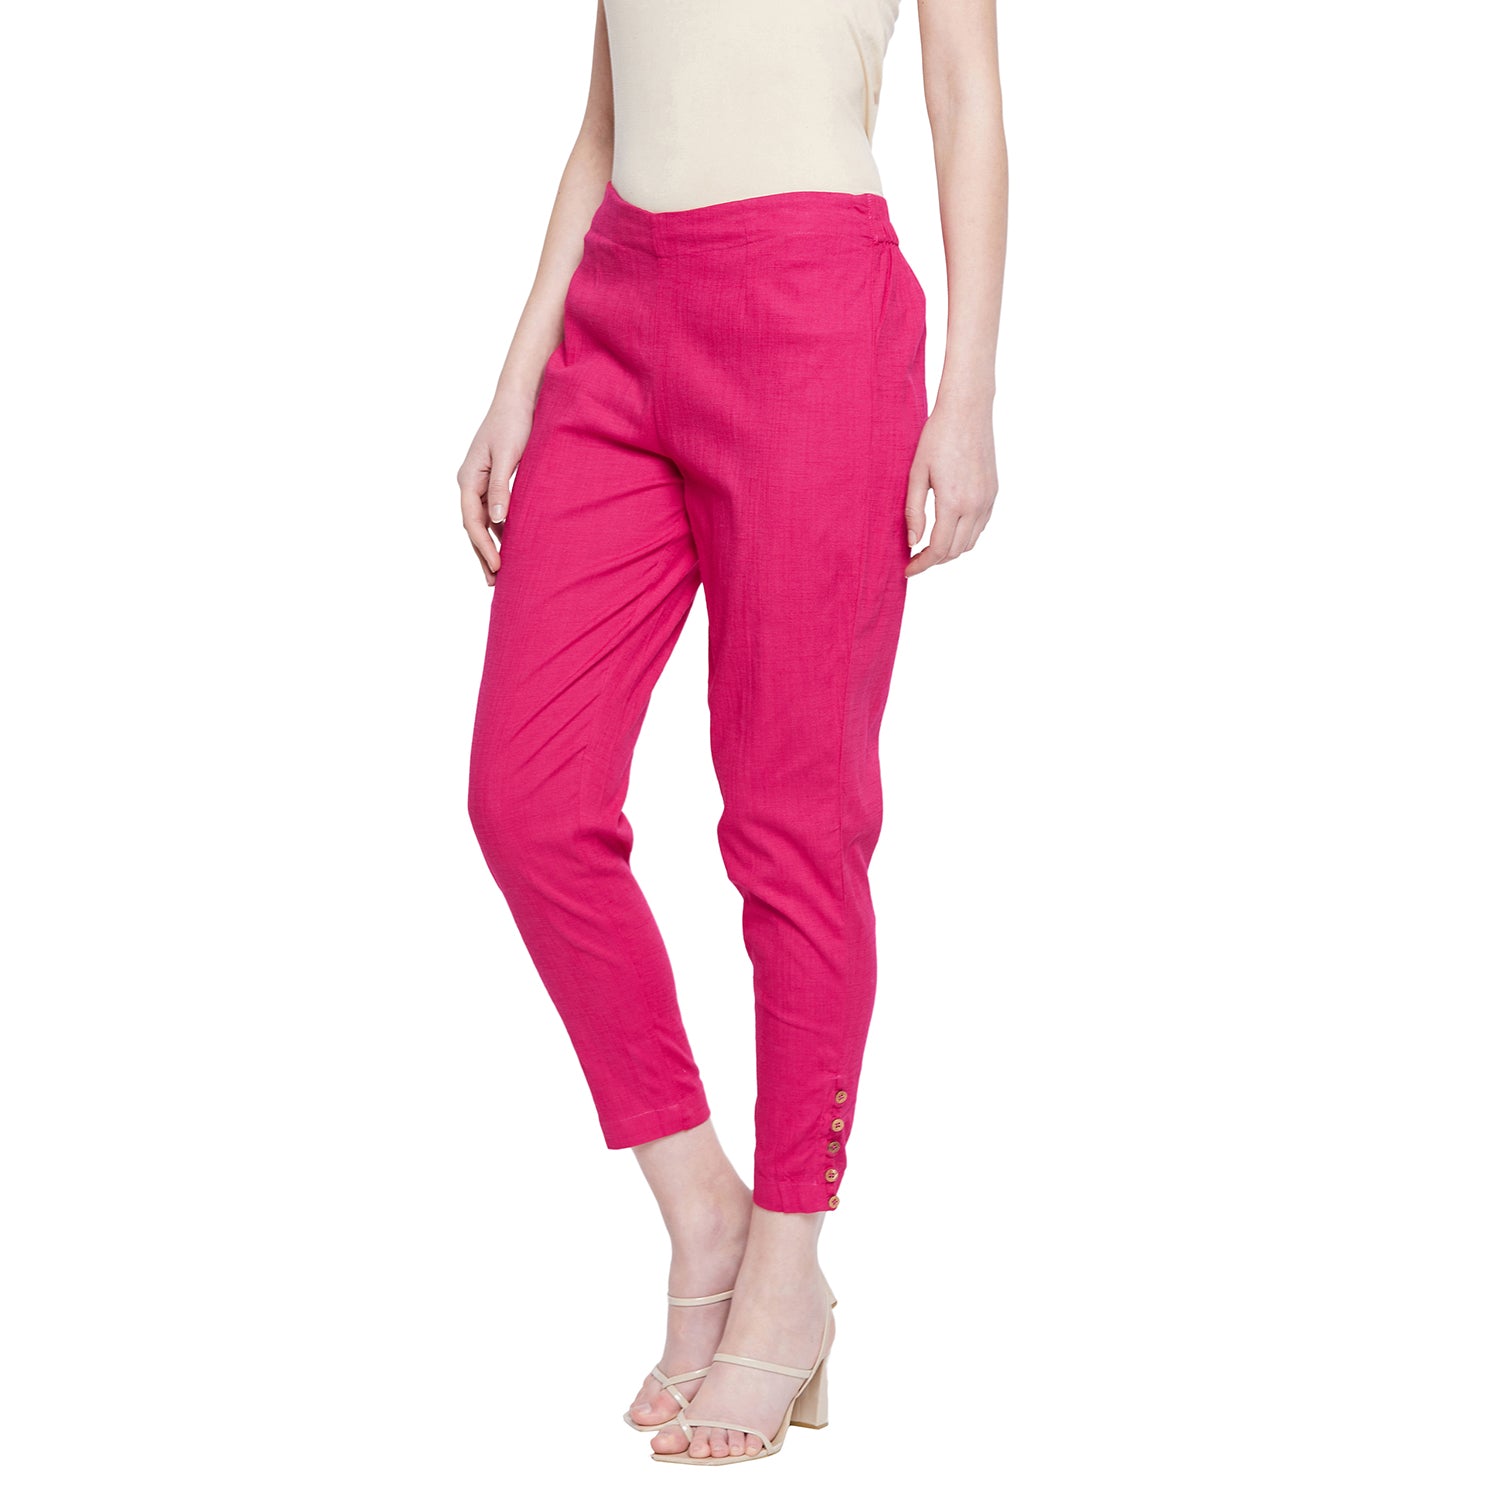 White Cotton Pants for Women with Pockets | Go Colors